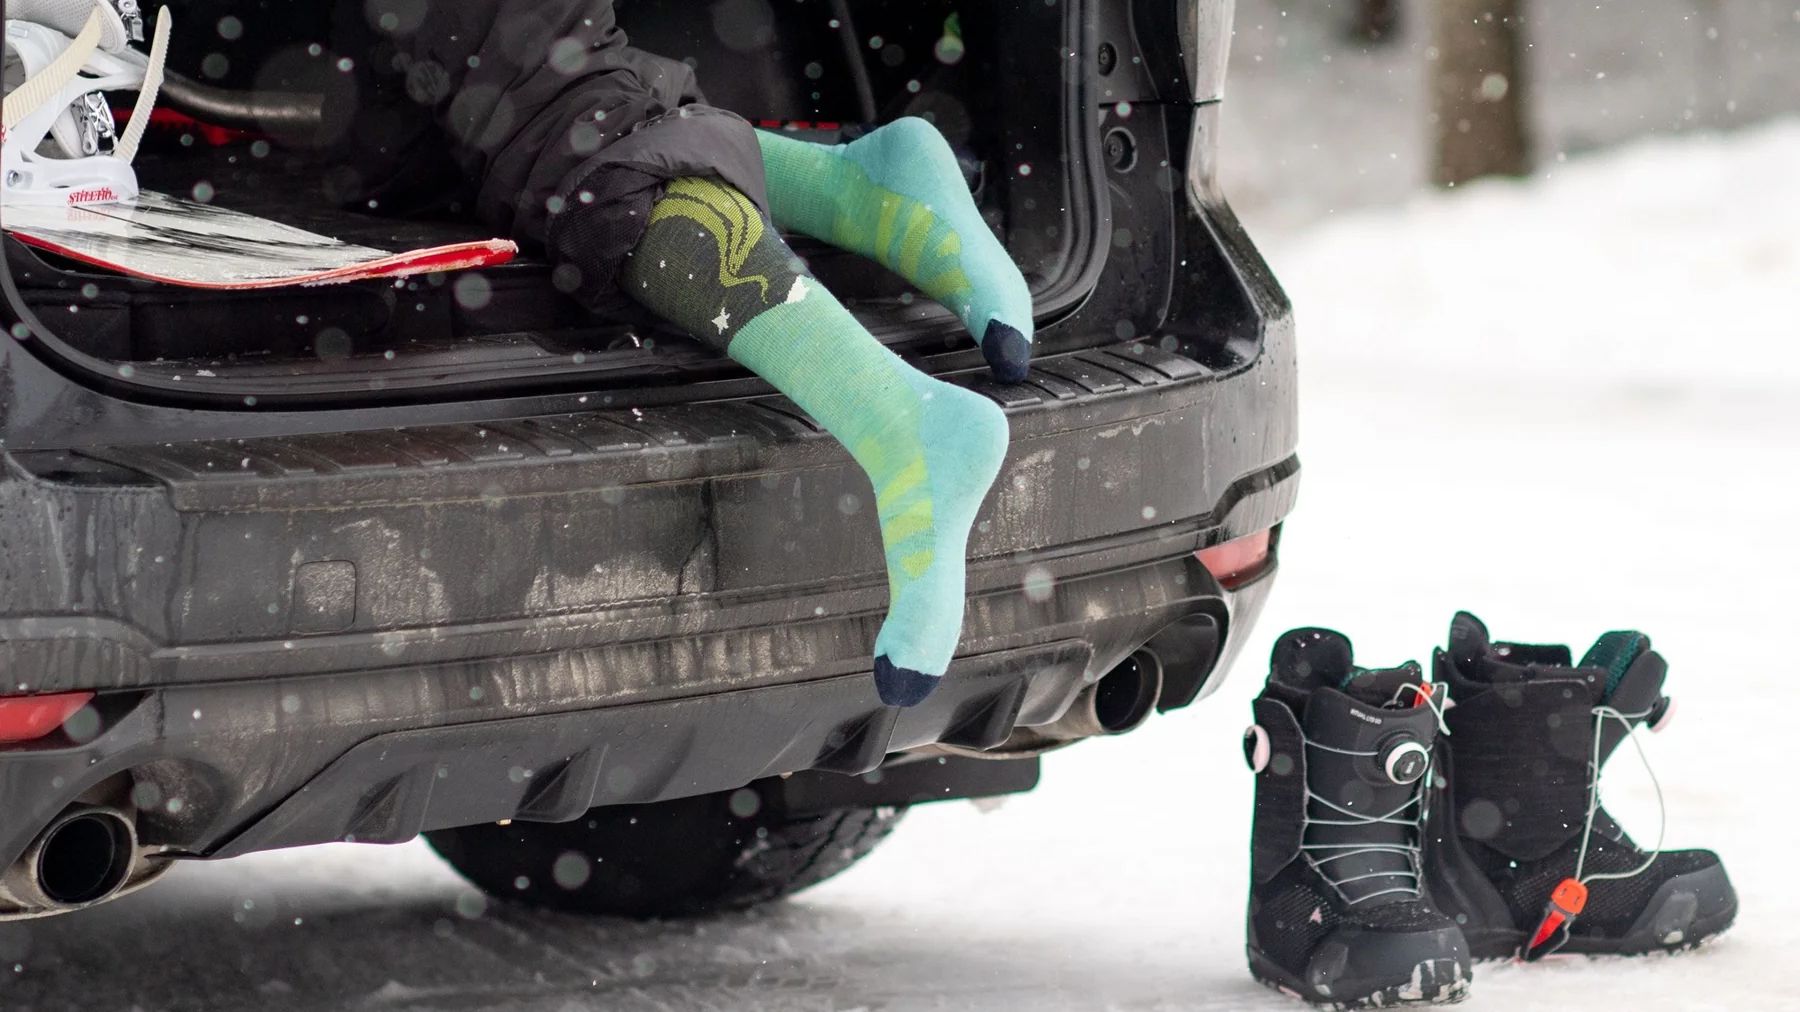 The NBA And MLB Use Them, Are Stance Ski Socks The Best On The Market? -  Unofficial Networks